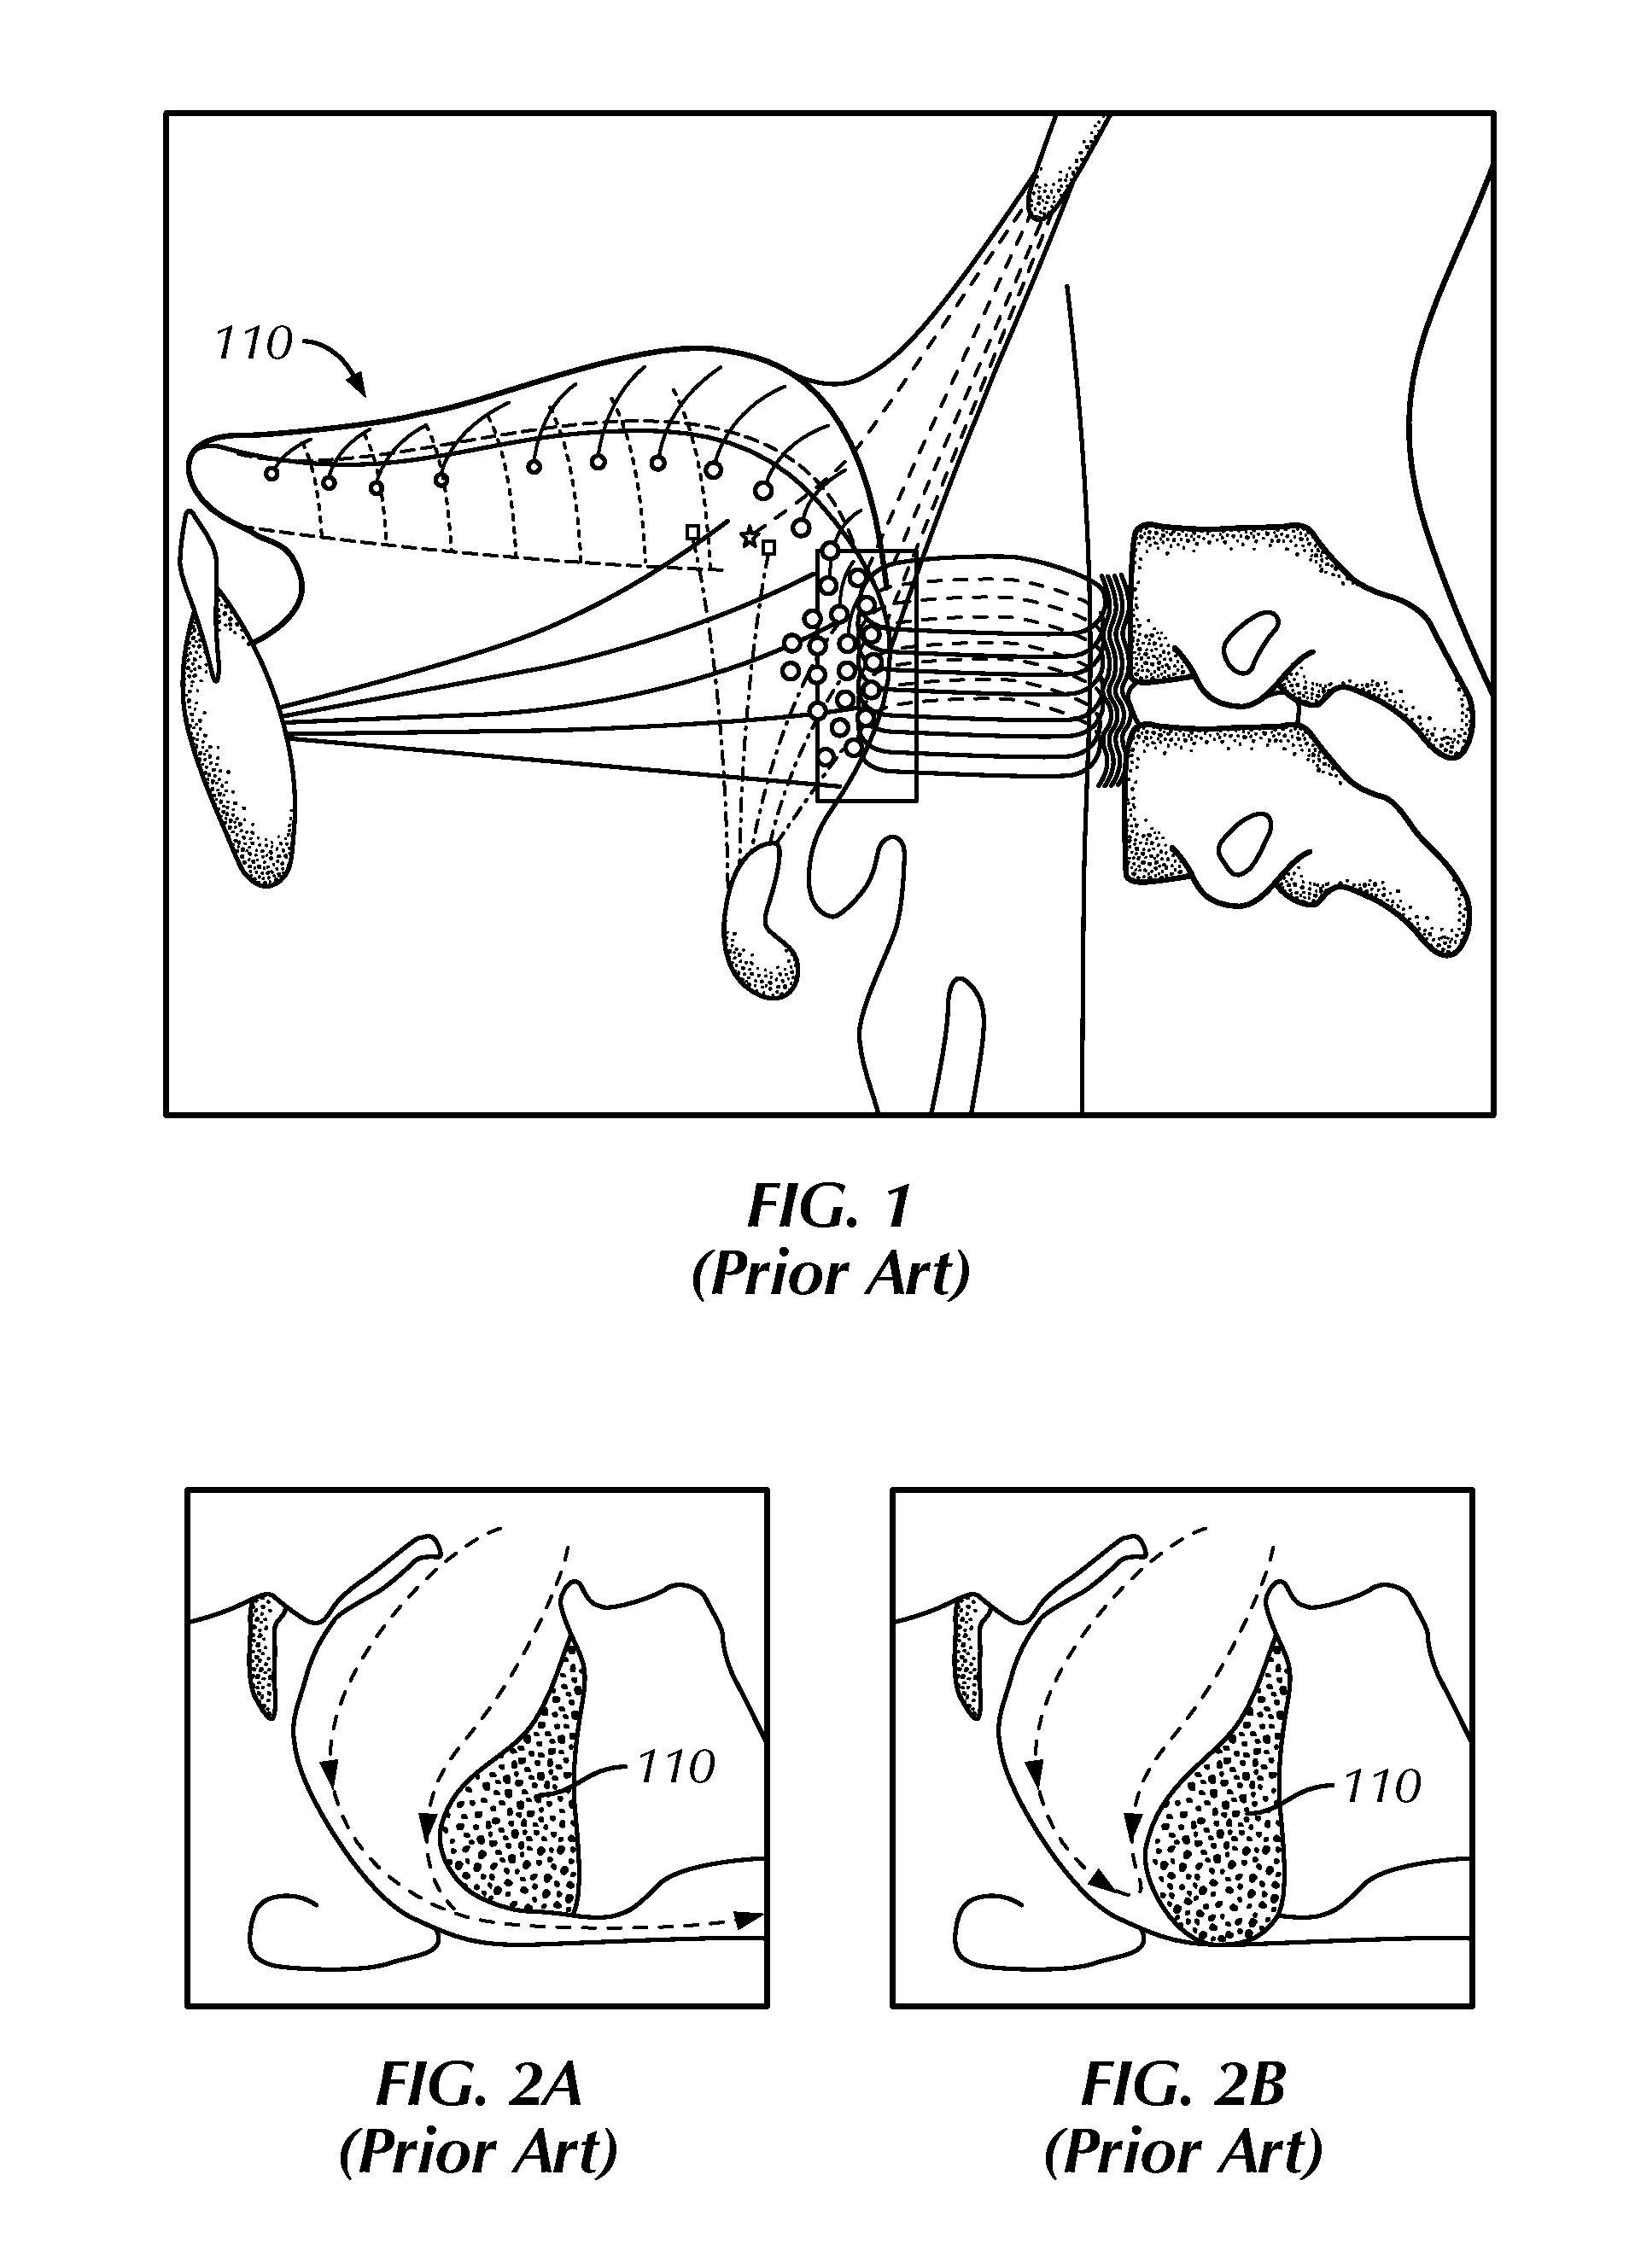 System For Stimulating A Hypoglossal Nerve For Controlling The Position Of A Patient's Tongue